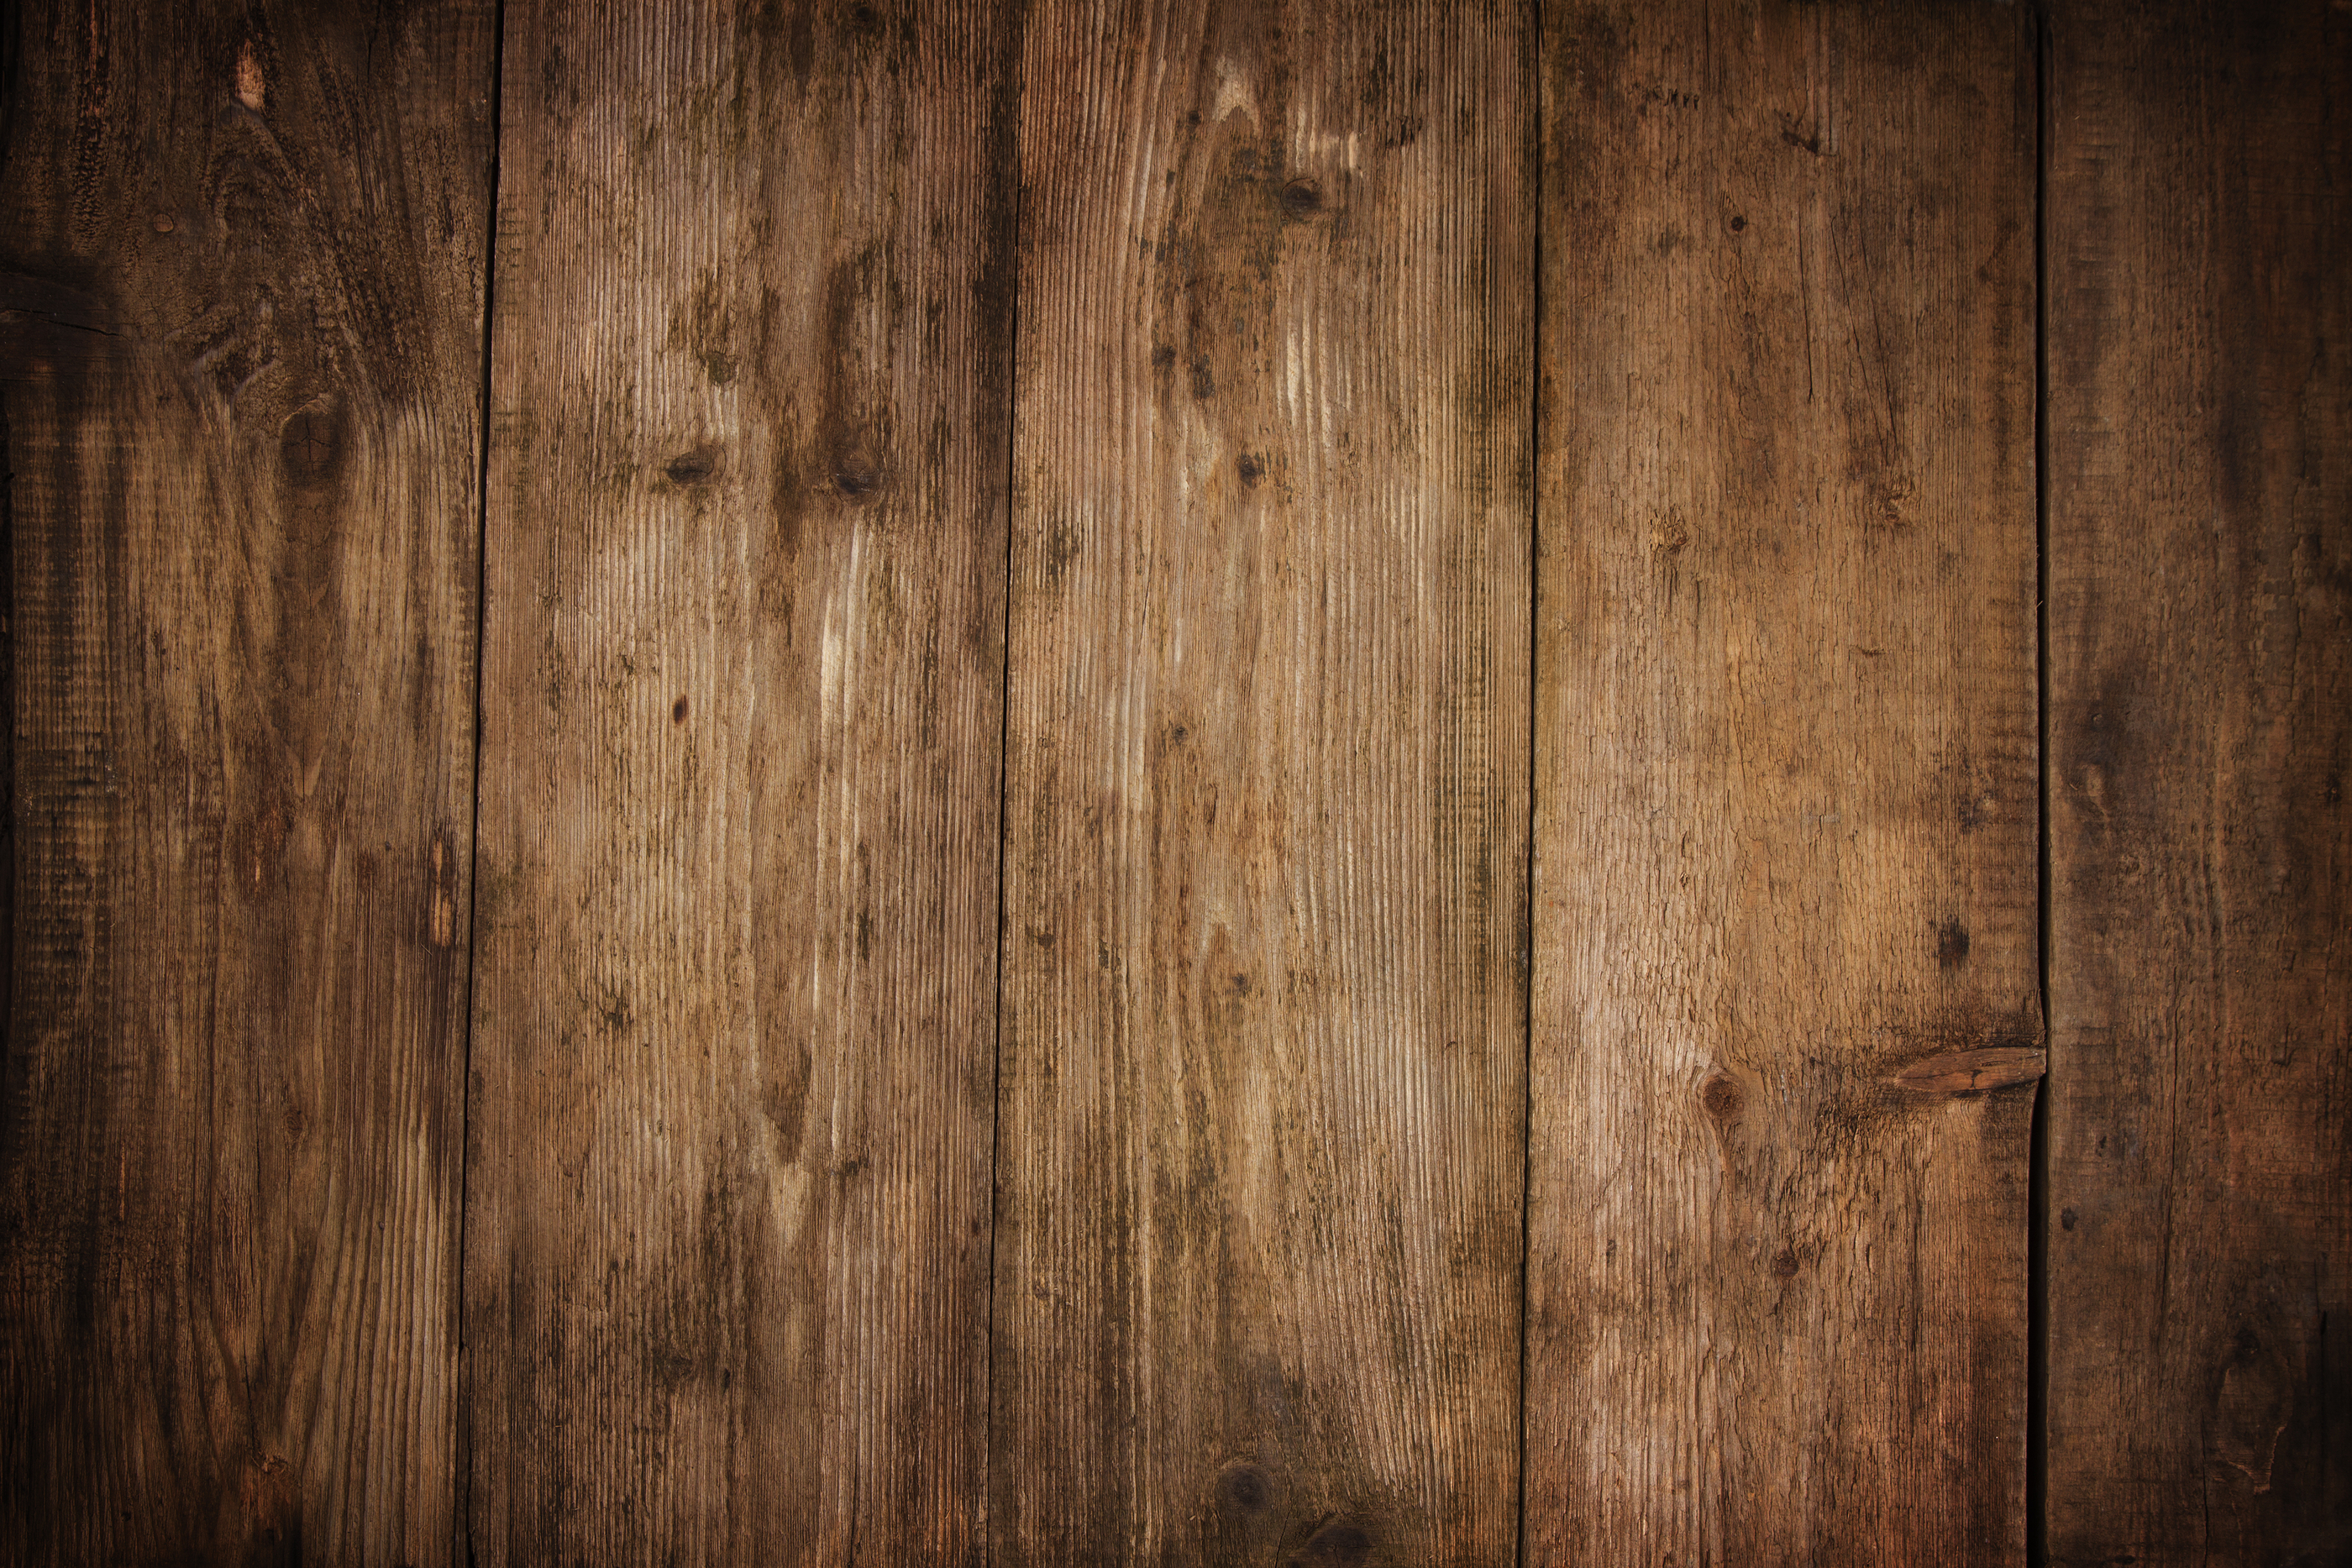 Wood Texture Plank Grain Background, Wooden Desk Table Or